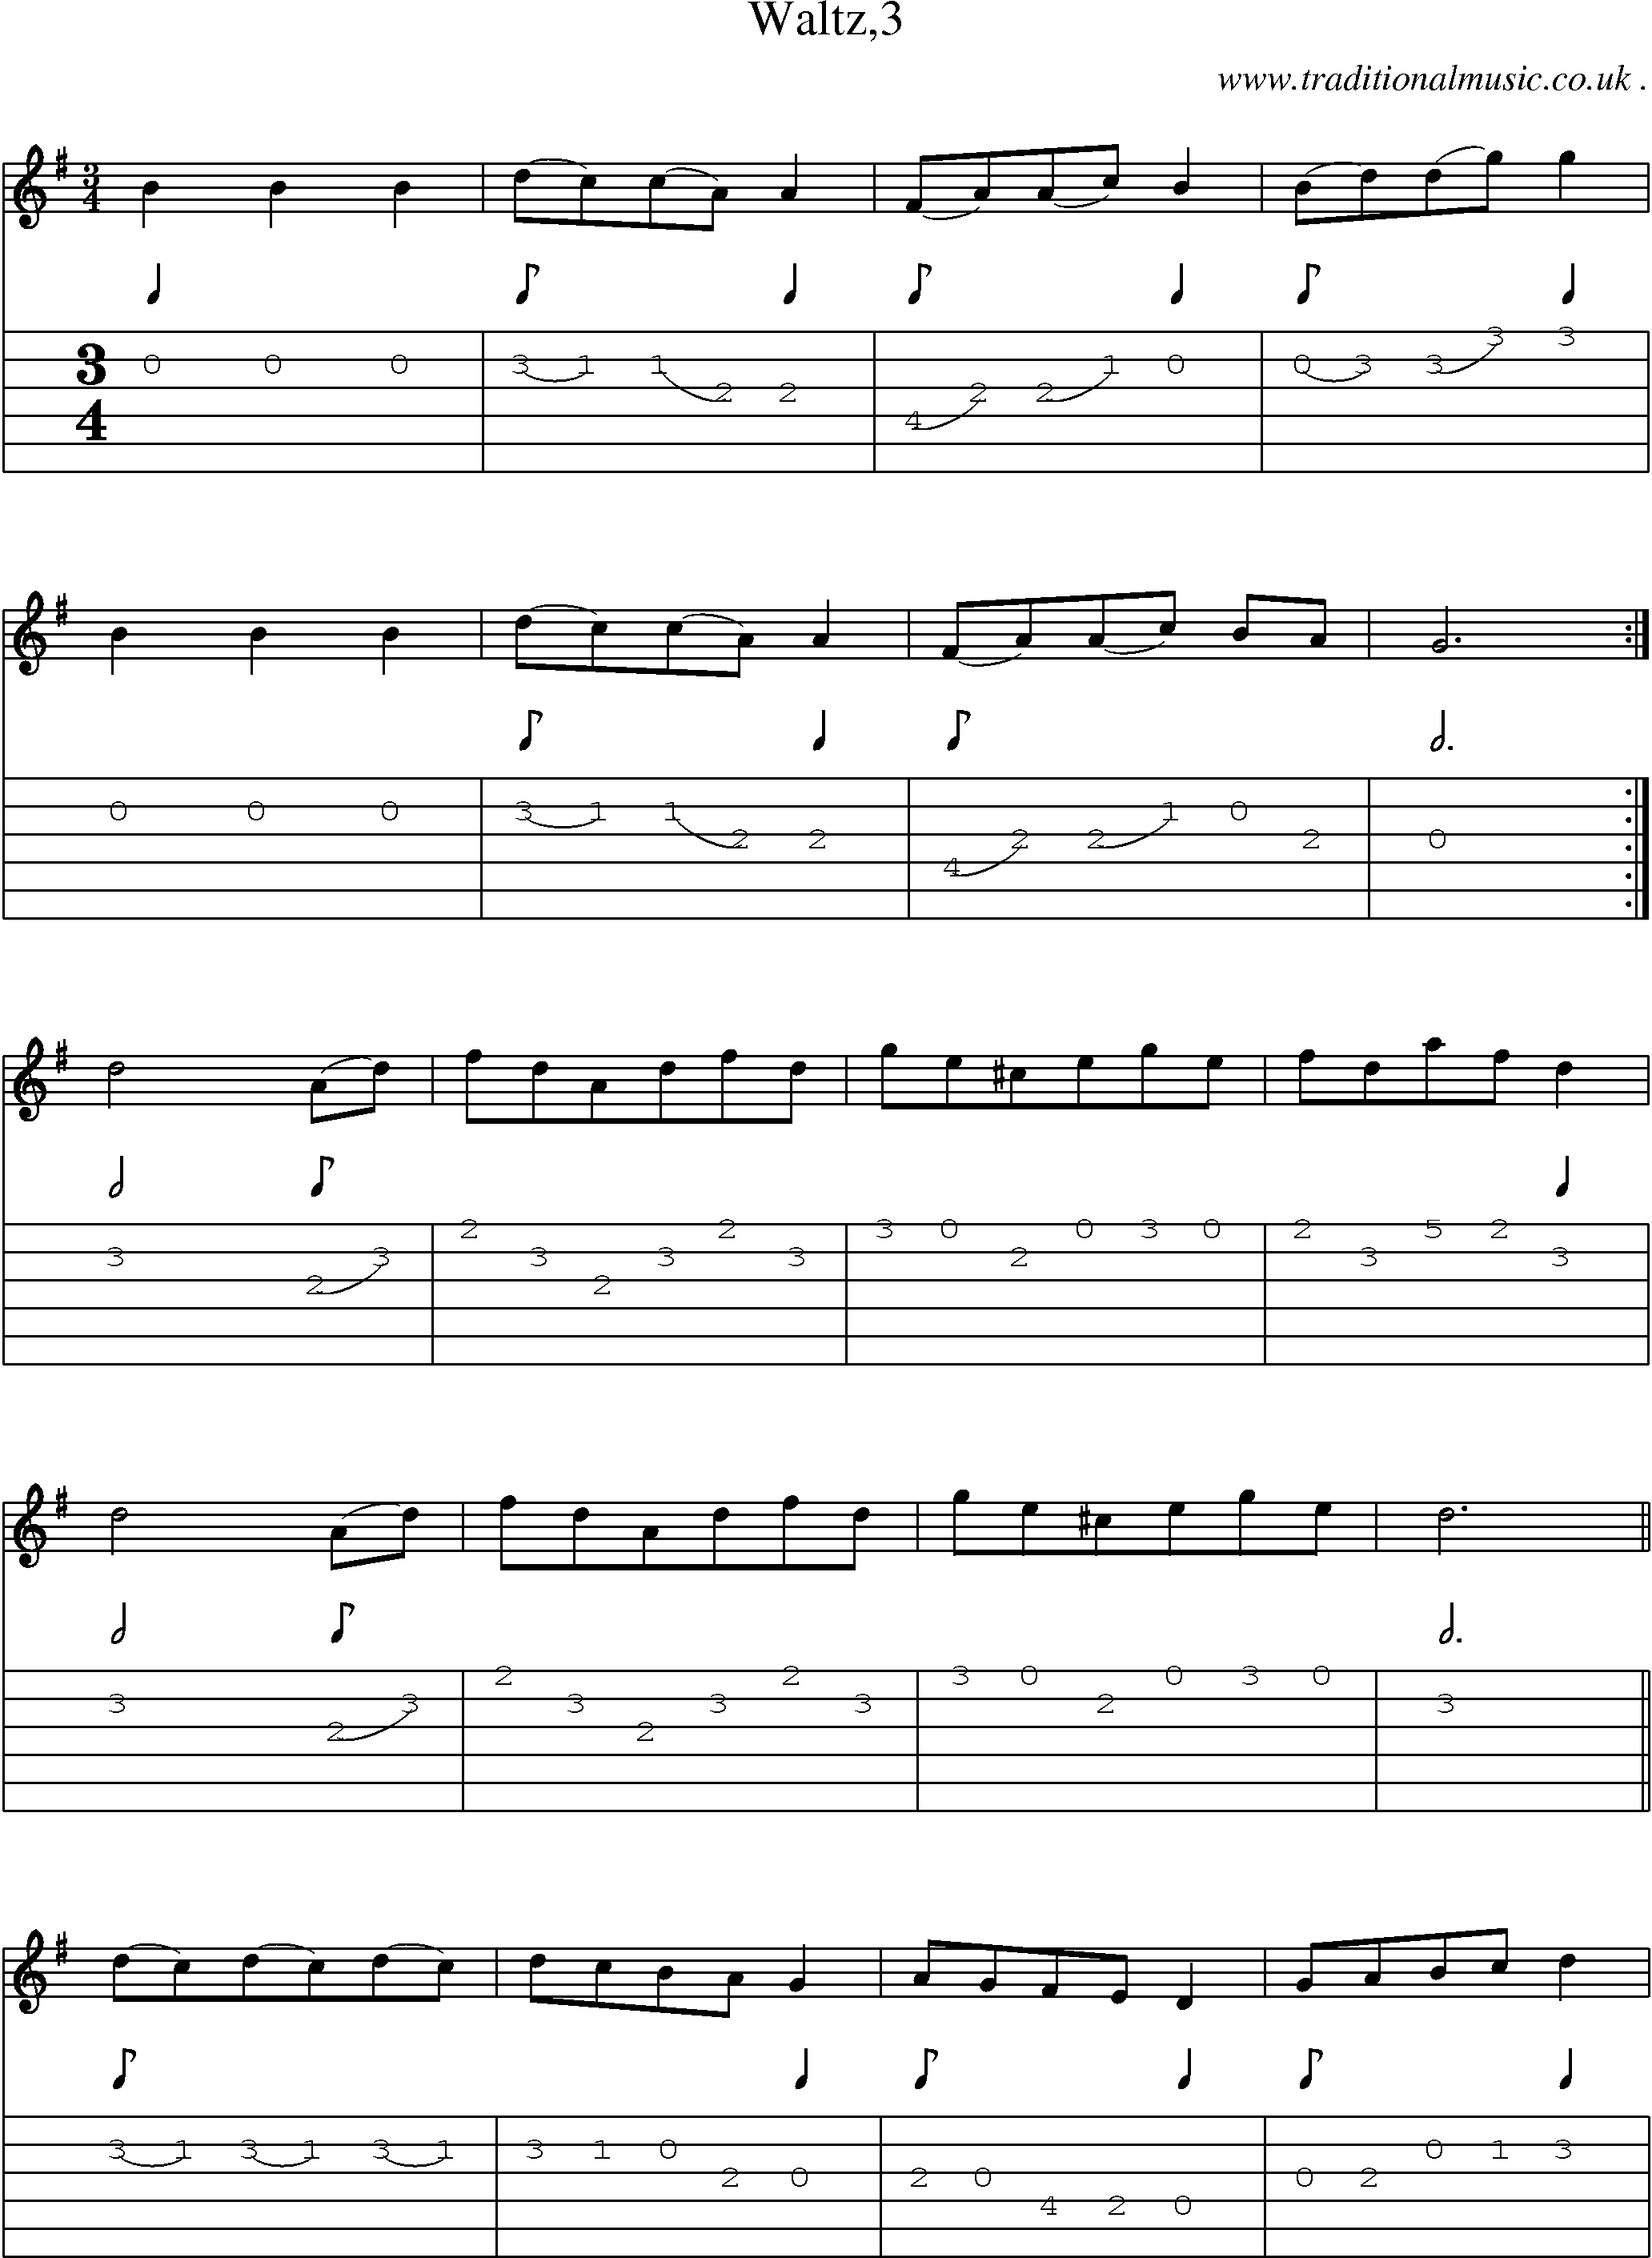 Sheet-Music and Guitar Tabs for Waltz3